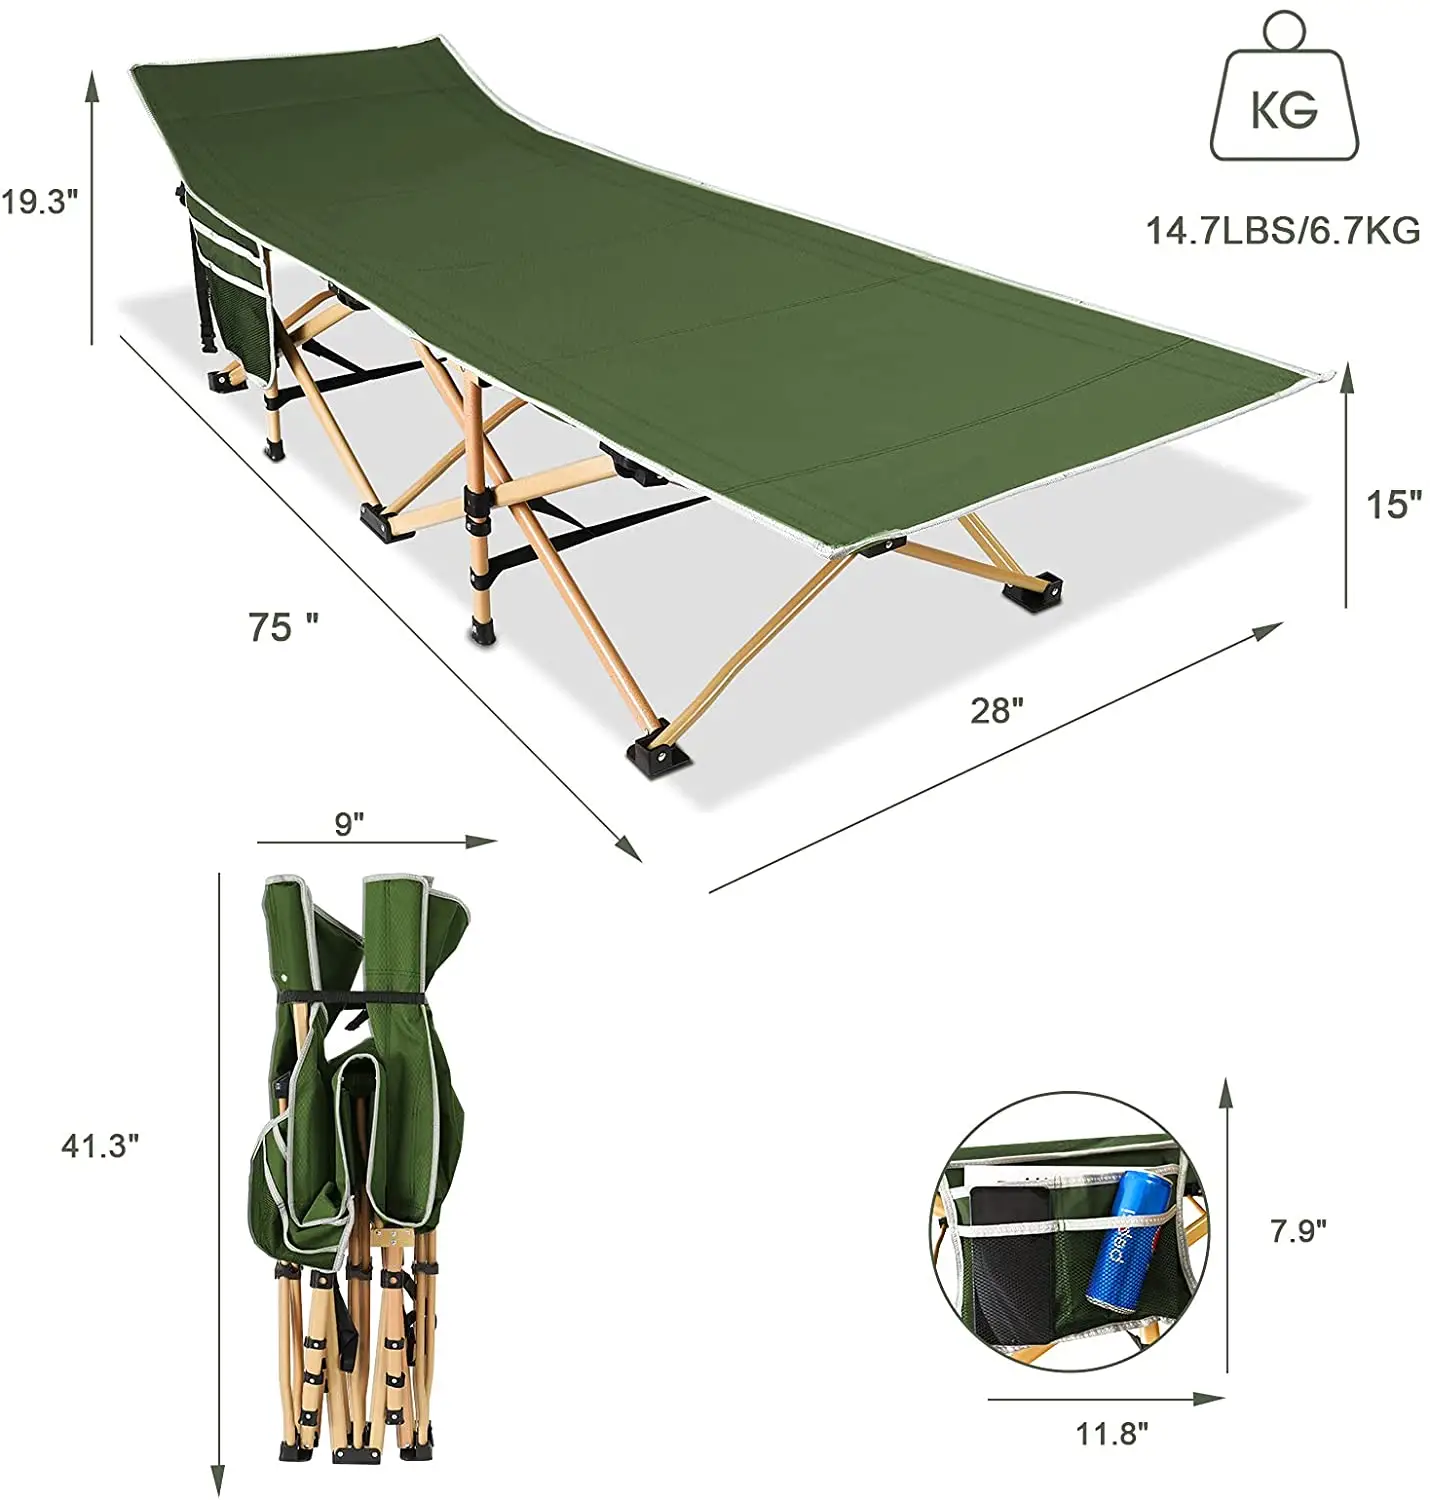 How To Lift An Air Bed For Camping